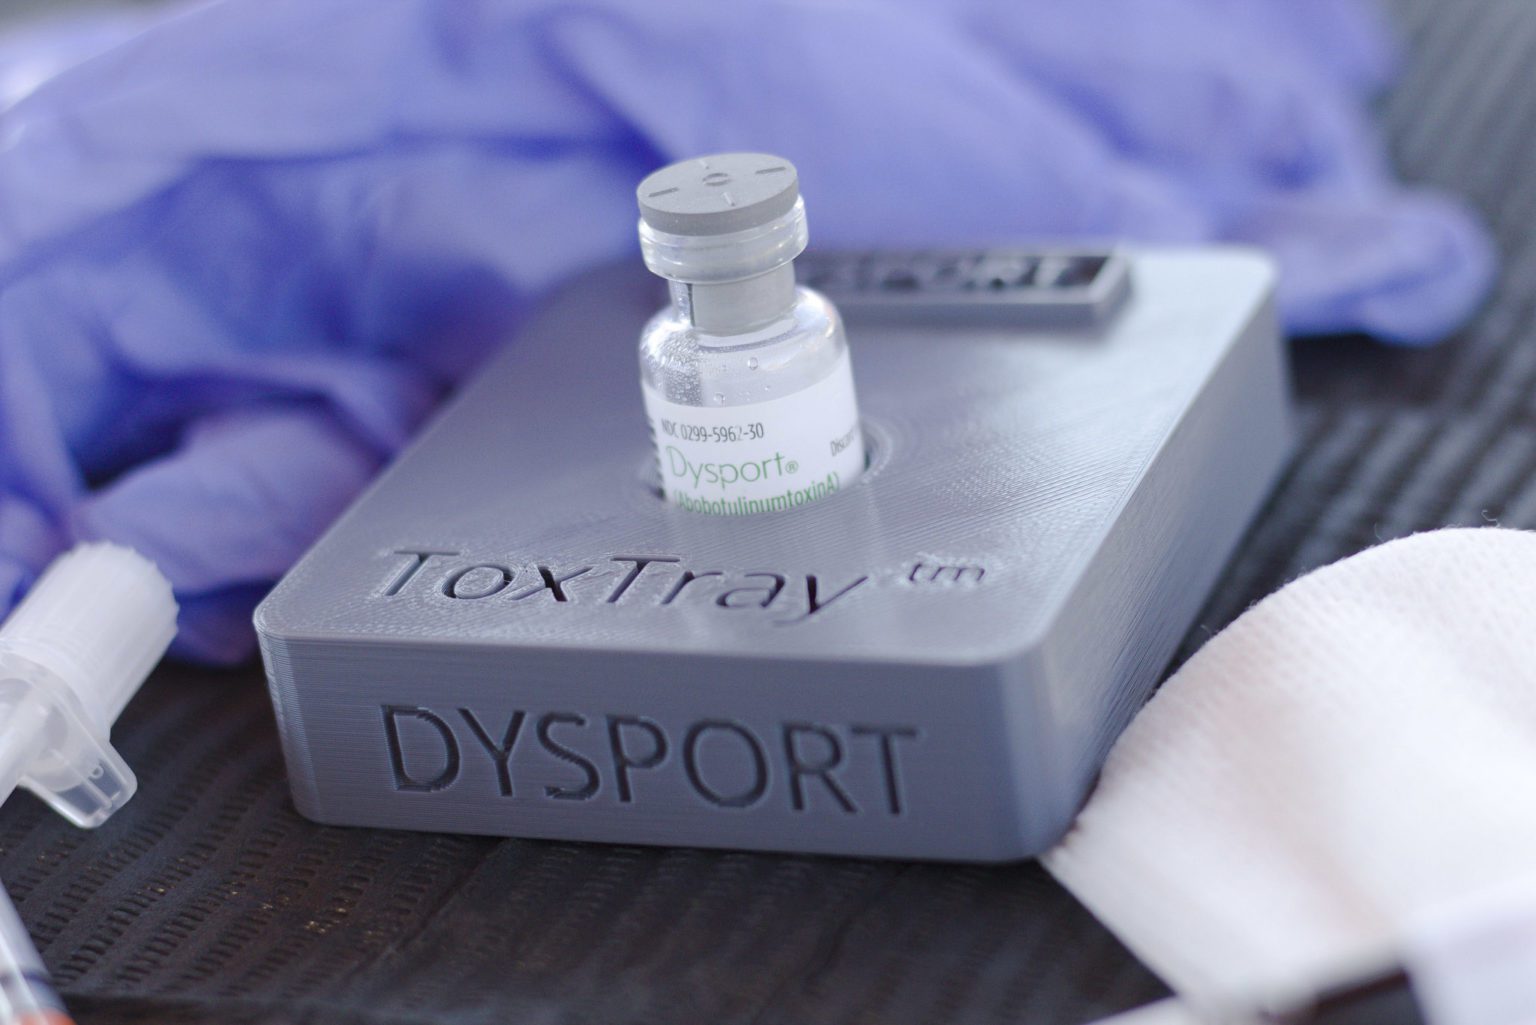 ToxTray Tower Single Tray - Dysport Vial Holder - Aesthetic Record ...